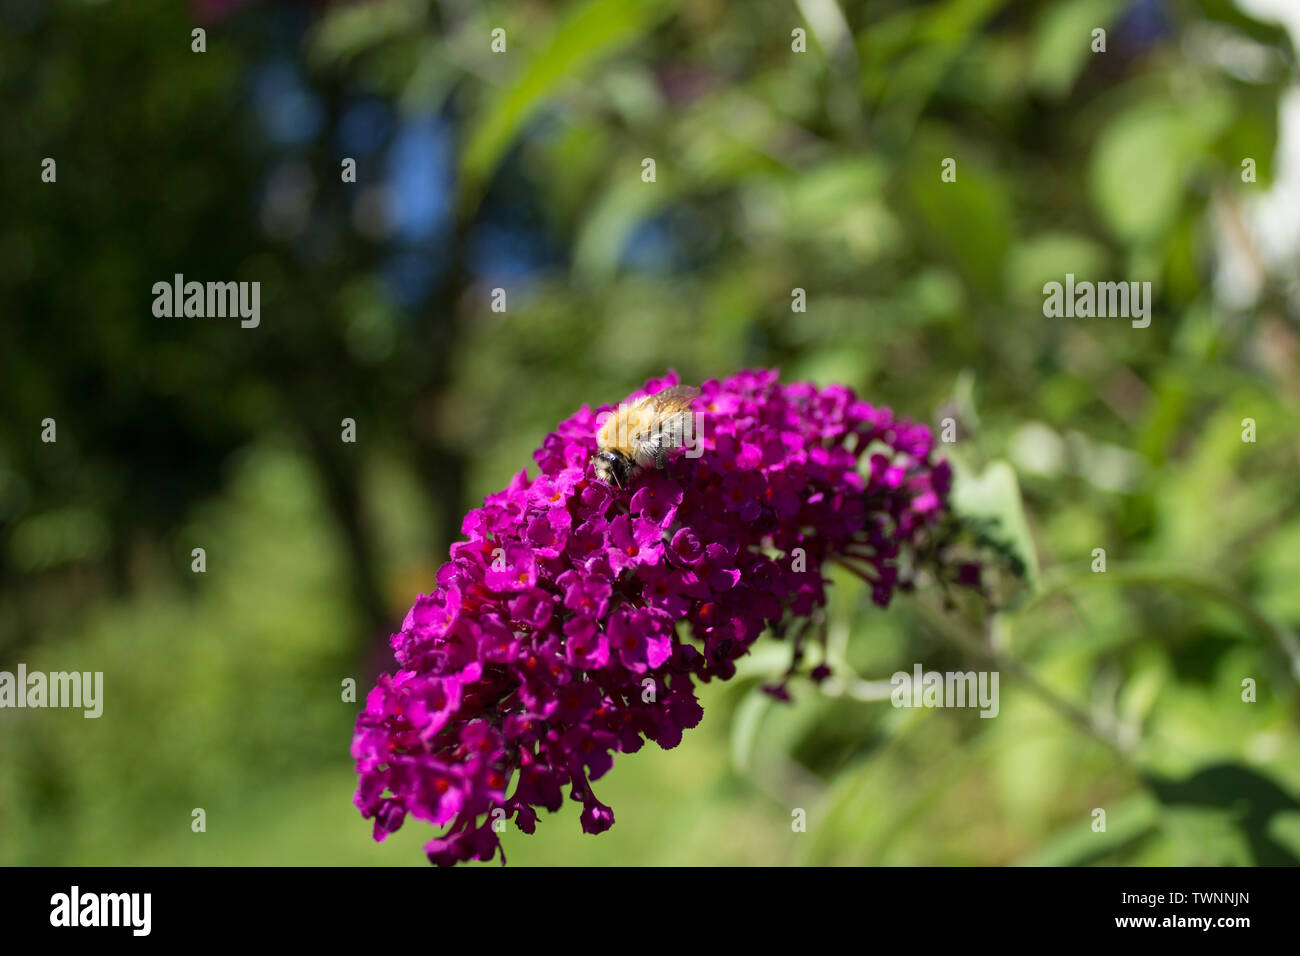 Bumblebee on a lilac plant Stock Photo